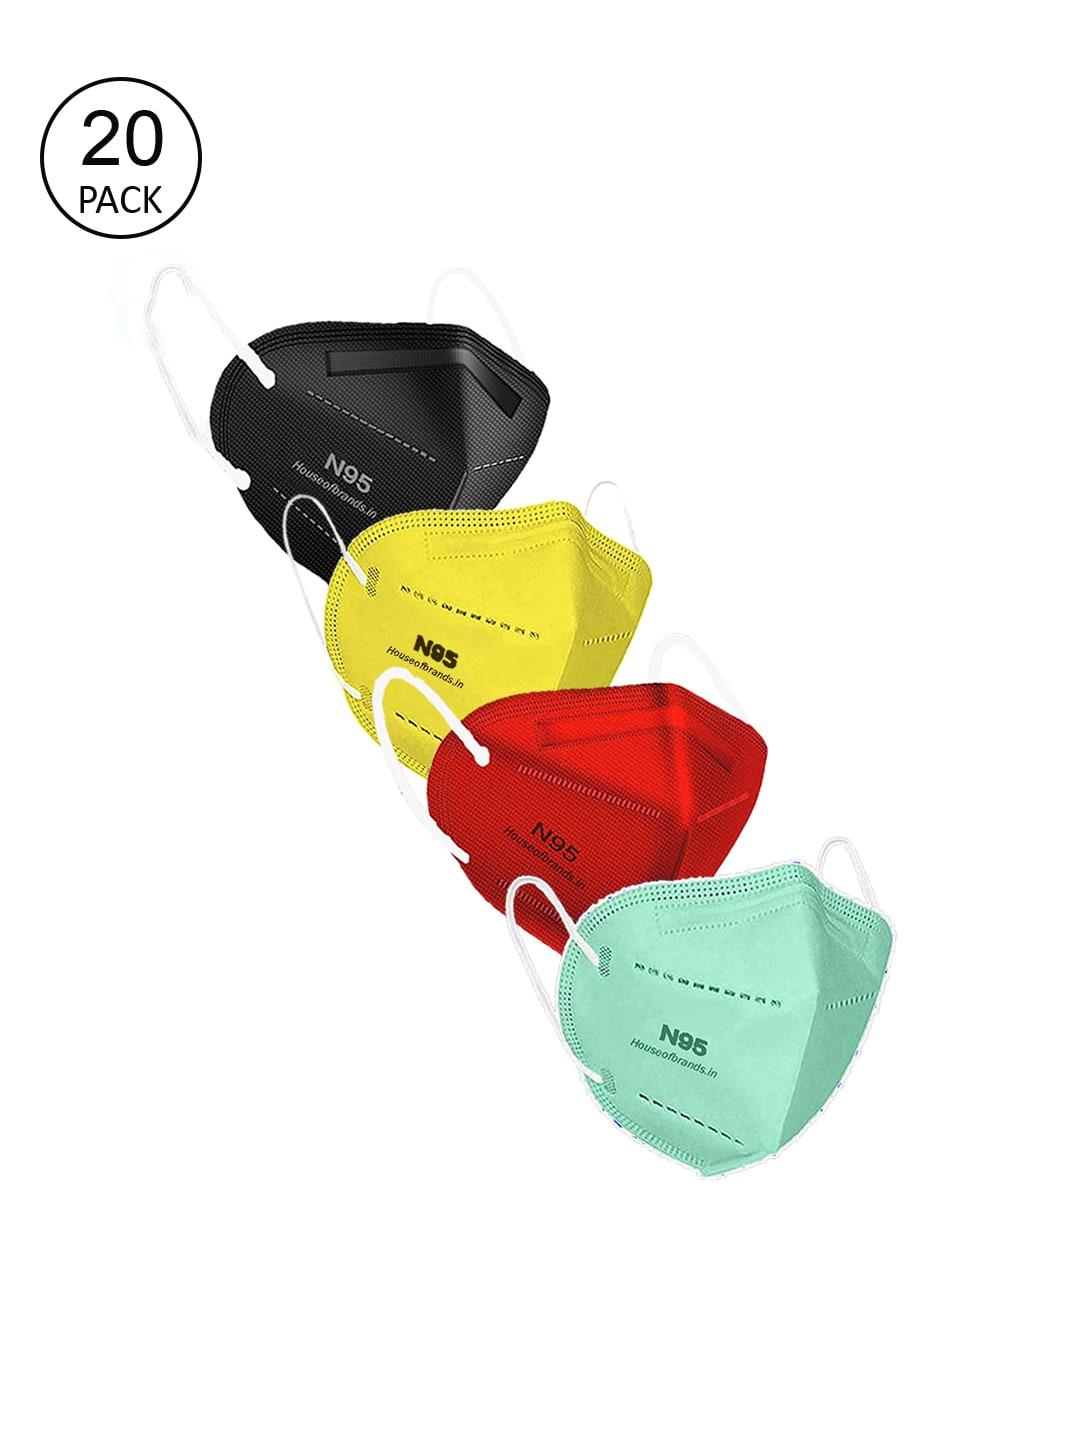 swiss design unisex pack of 20 assorted 5-ply anti-pollution n95 masks